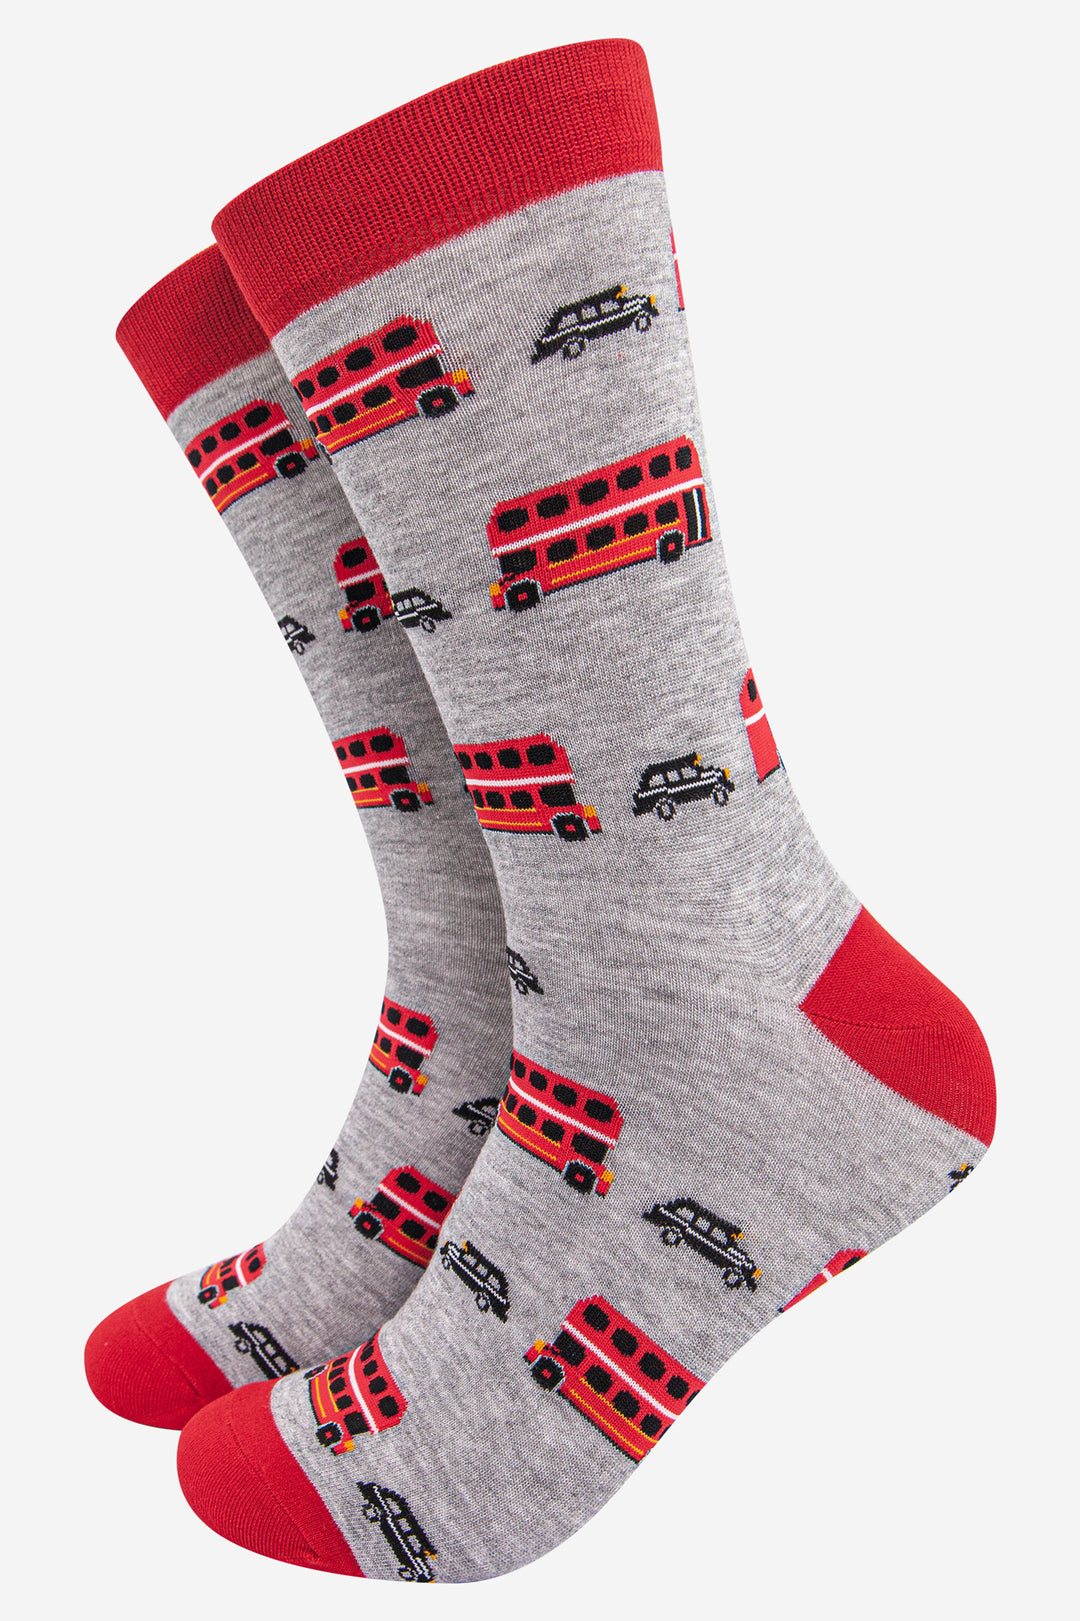 grey socks with red heel, toe and cuff with an all over pattern of black hackney cabs and red buses